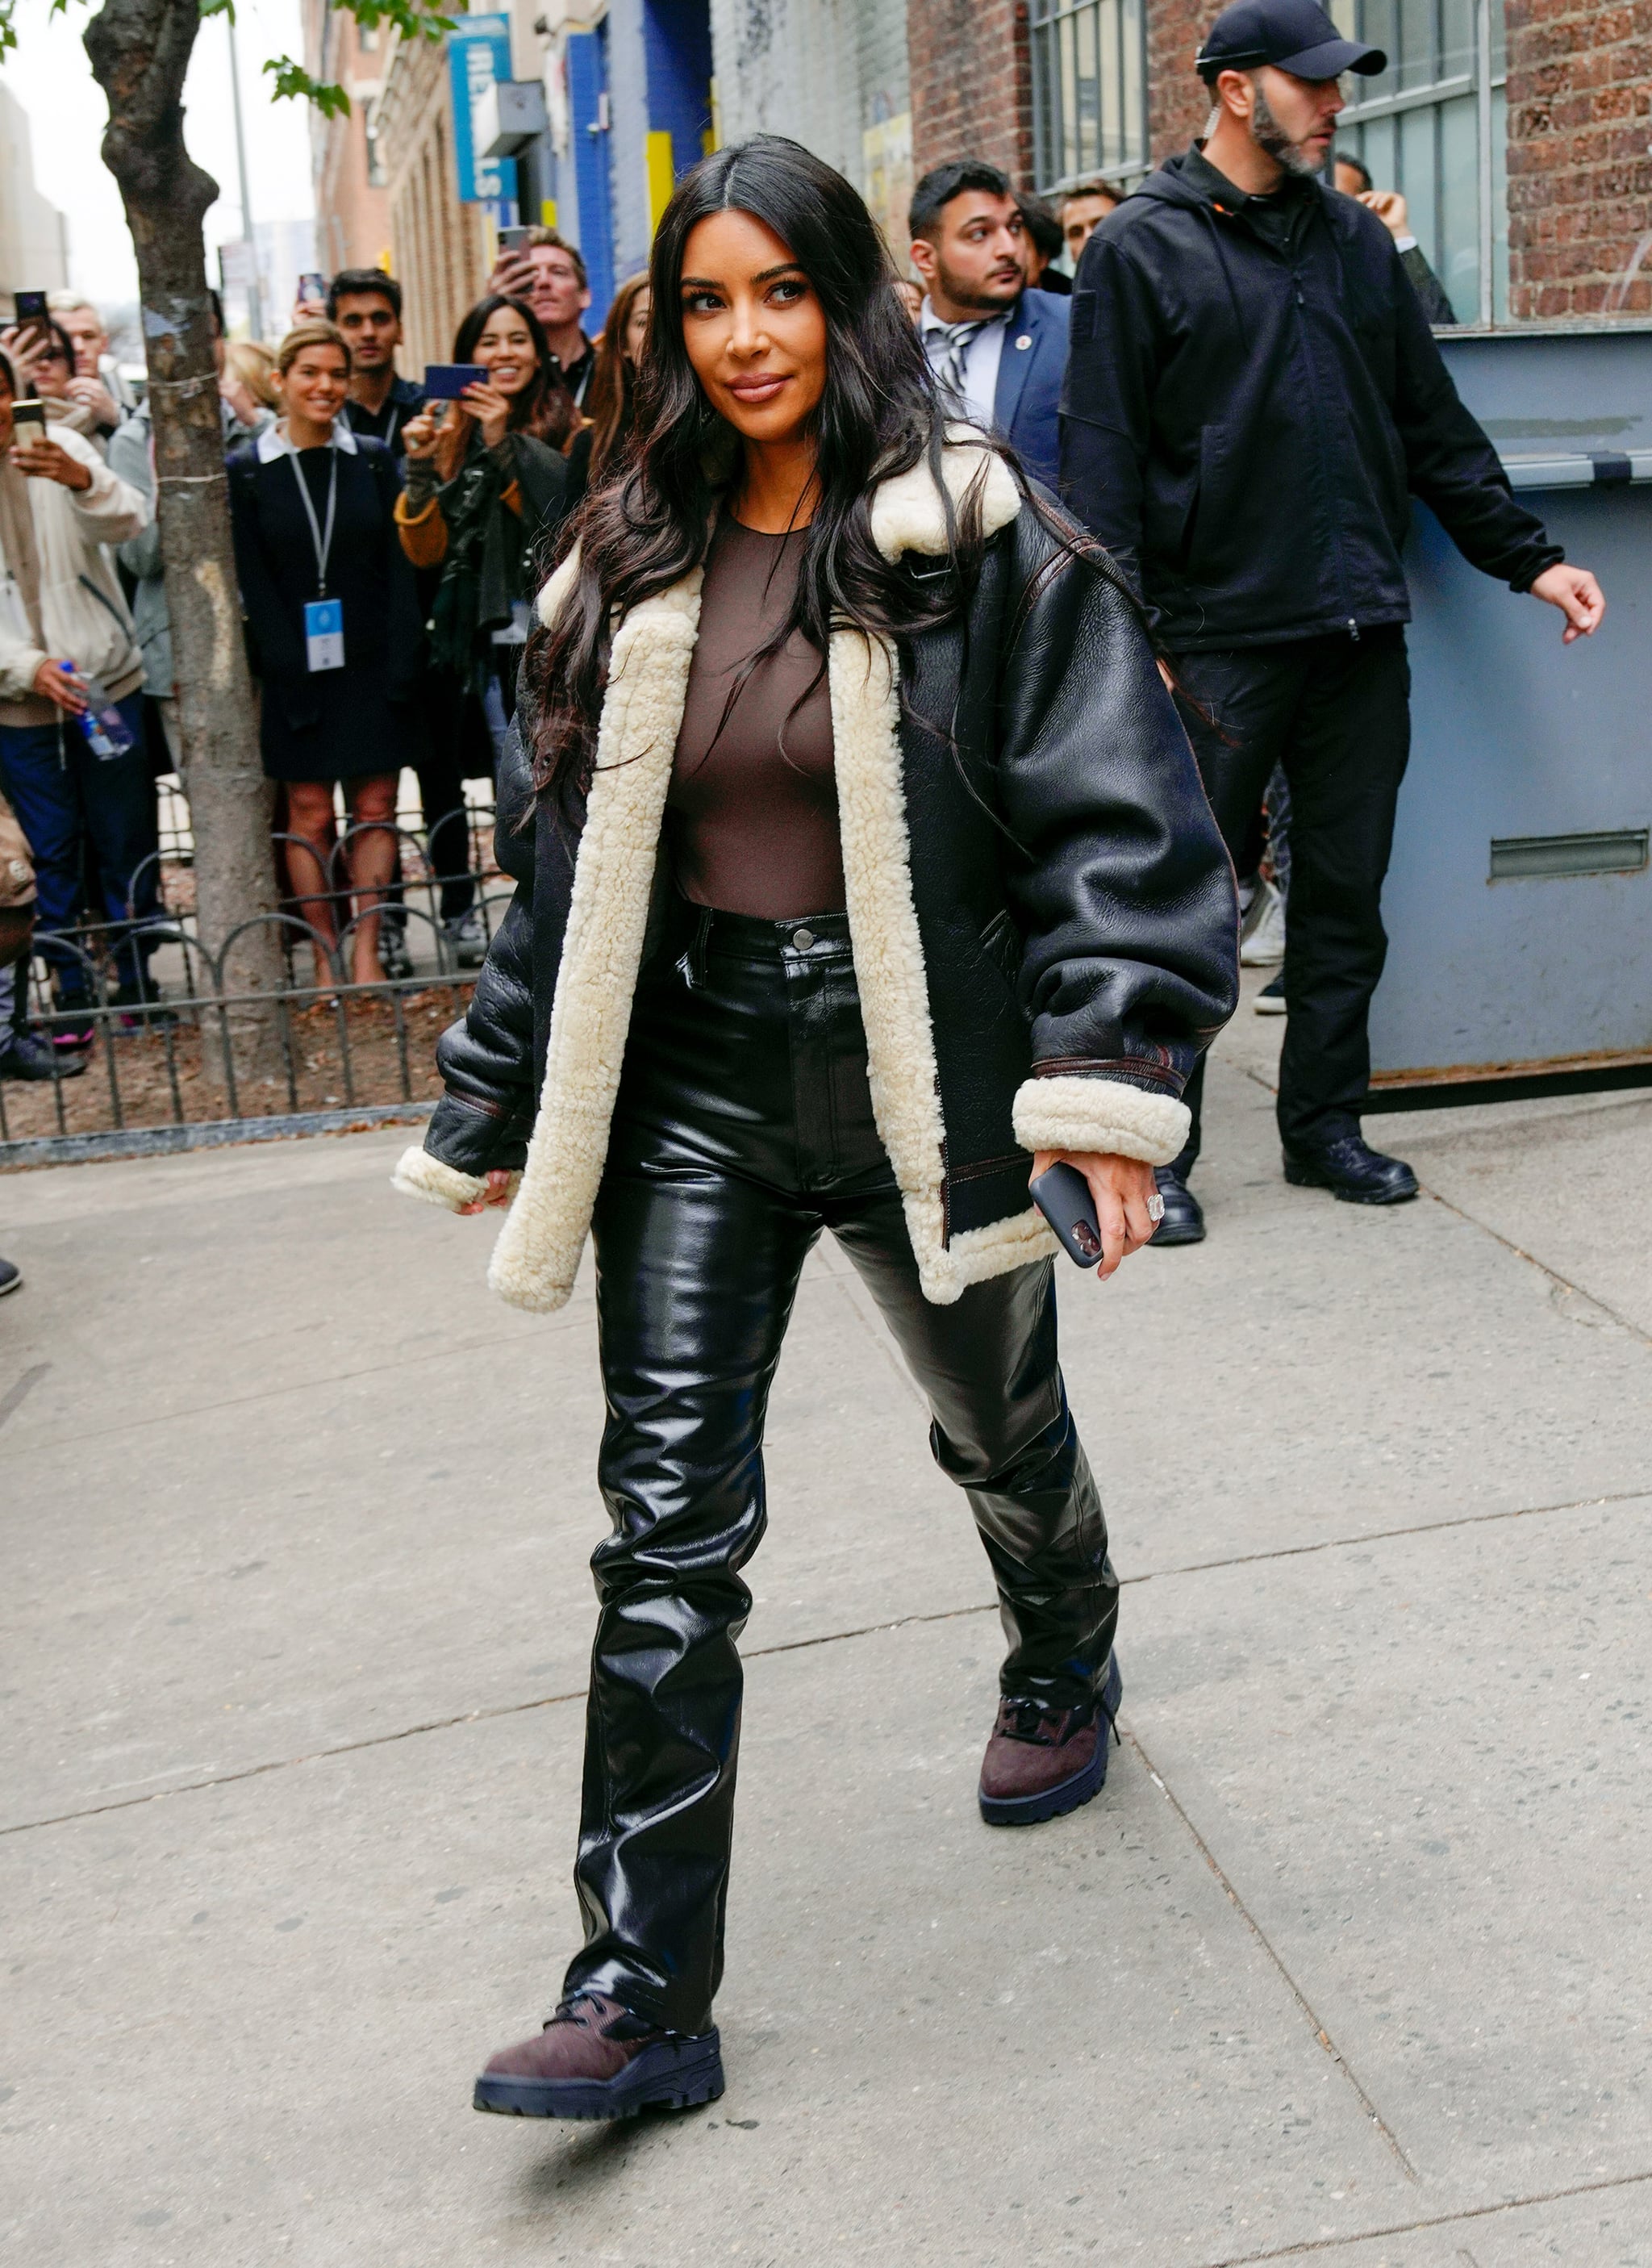 Kim Kardashian's Patent Leather Pants in NYC, If You Can Find Someone With  More Leather Pants Than Kim Kardashian, I'll Buy You a Pair